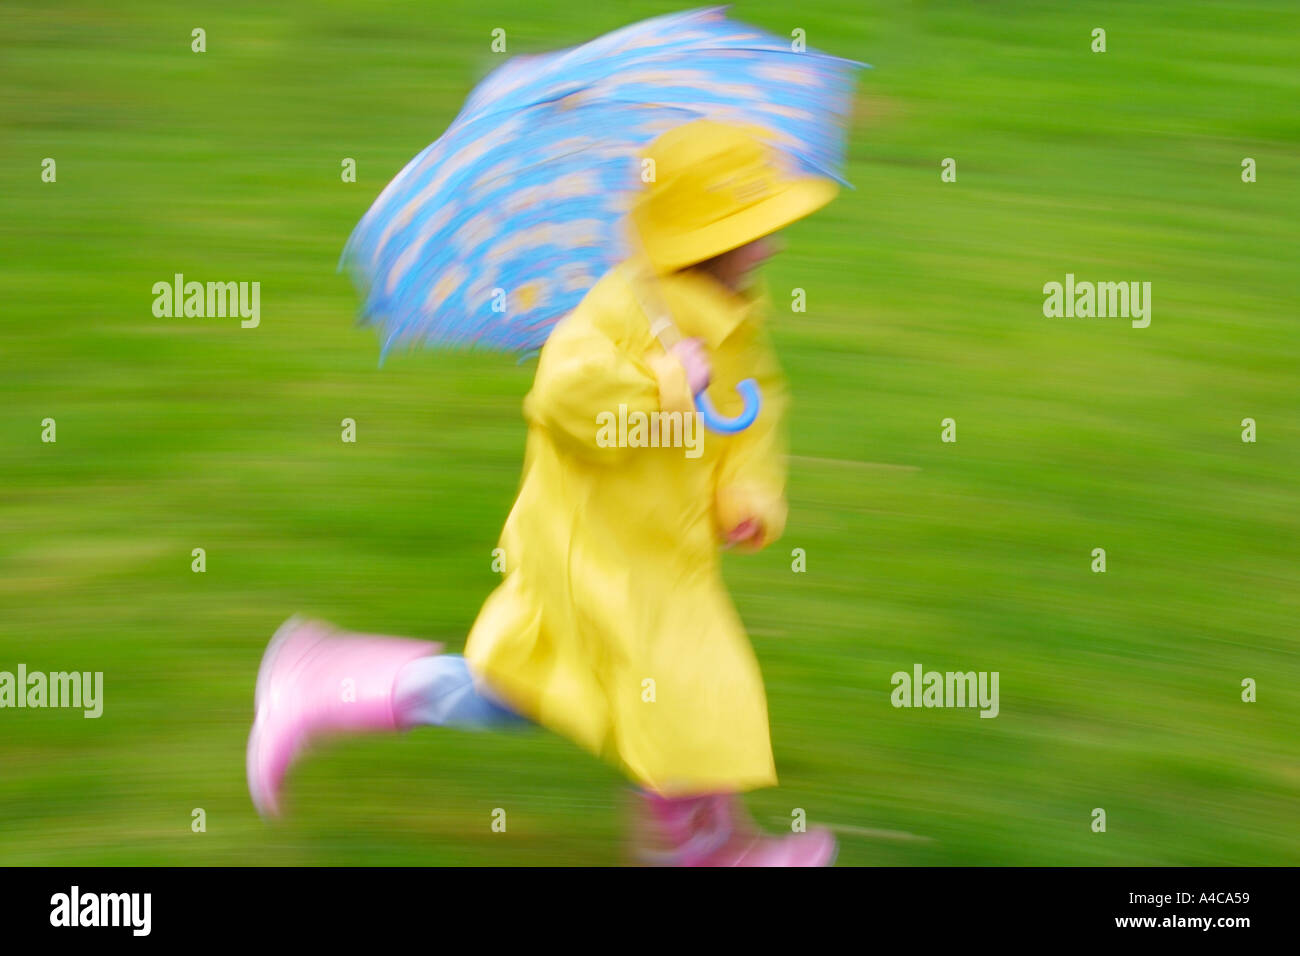 YOUNG GIRL RUNNING WITH BLUE UMBRELLA YELLOW RAINCOAT AND SOU'WESTER AND PINK WELLINGTON BOOTS  BLURRED IMAGE UK Stock Photo